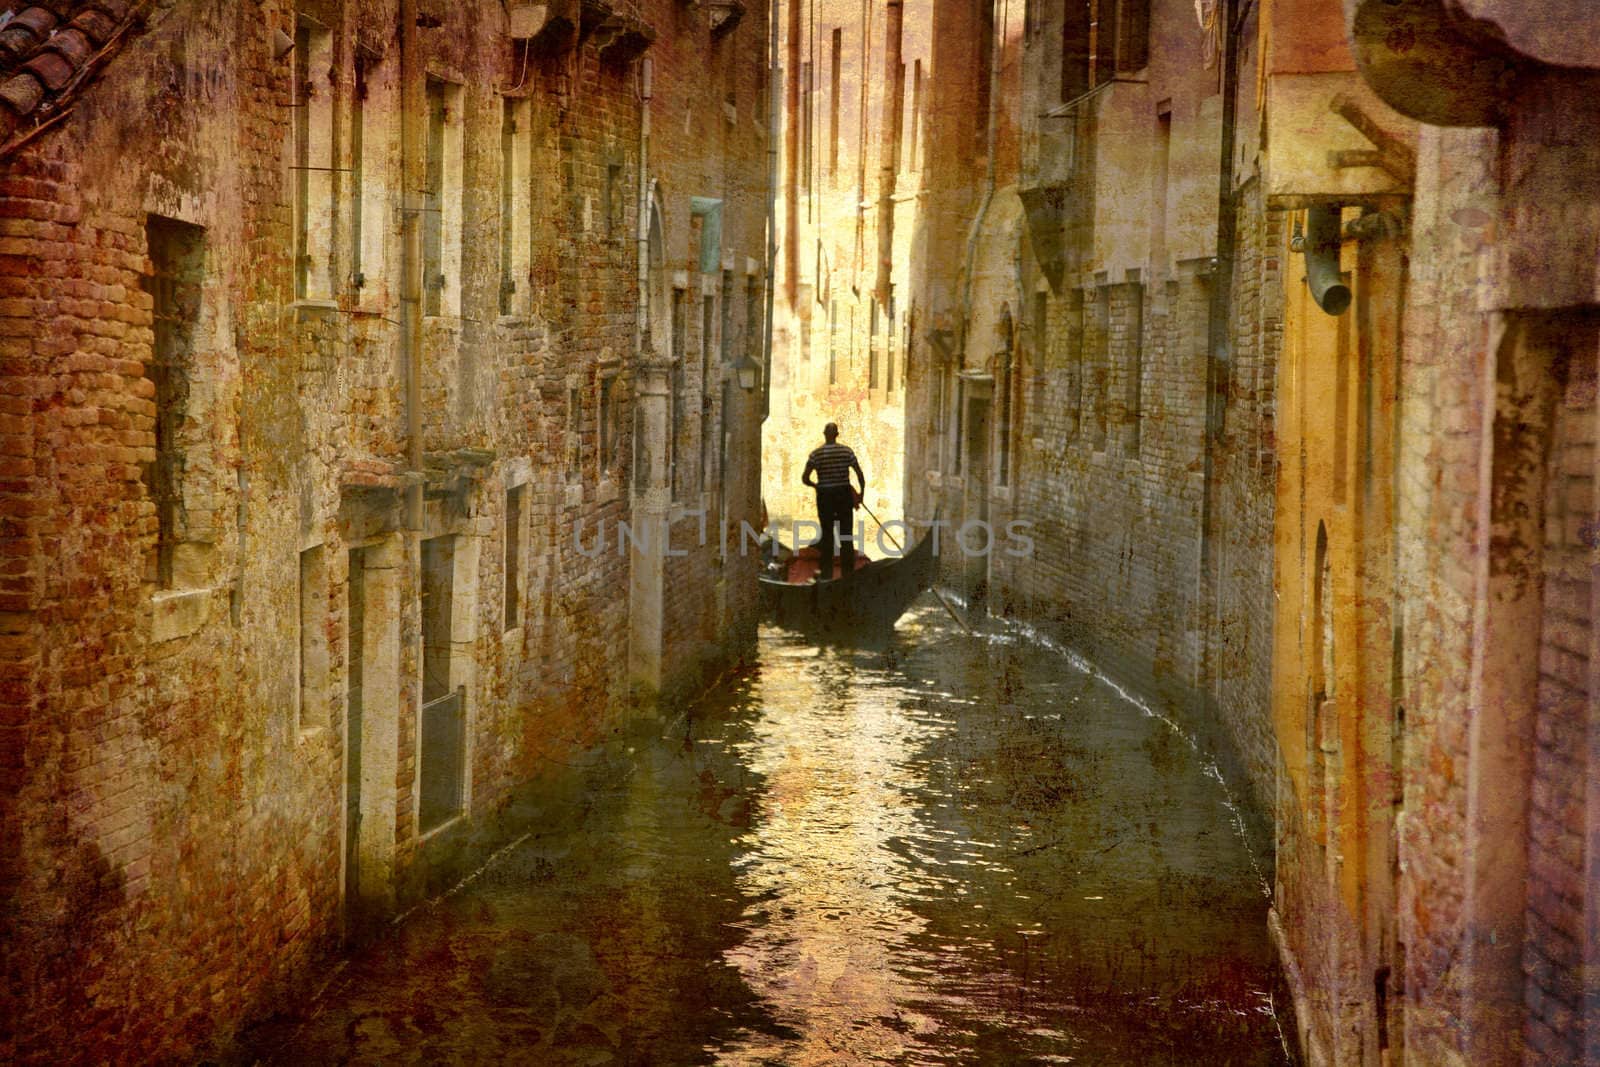 Artistic work of my own in retro style - Postcard from Italy. - Gondola  in urban- Venice.